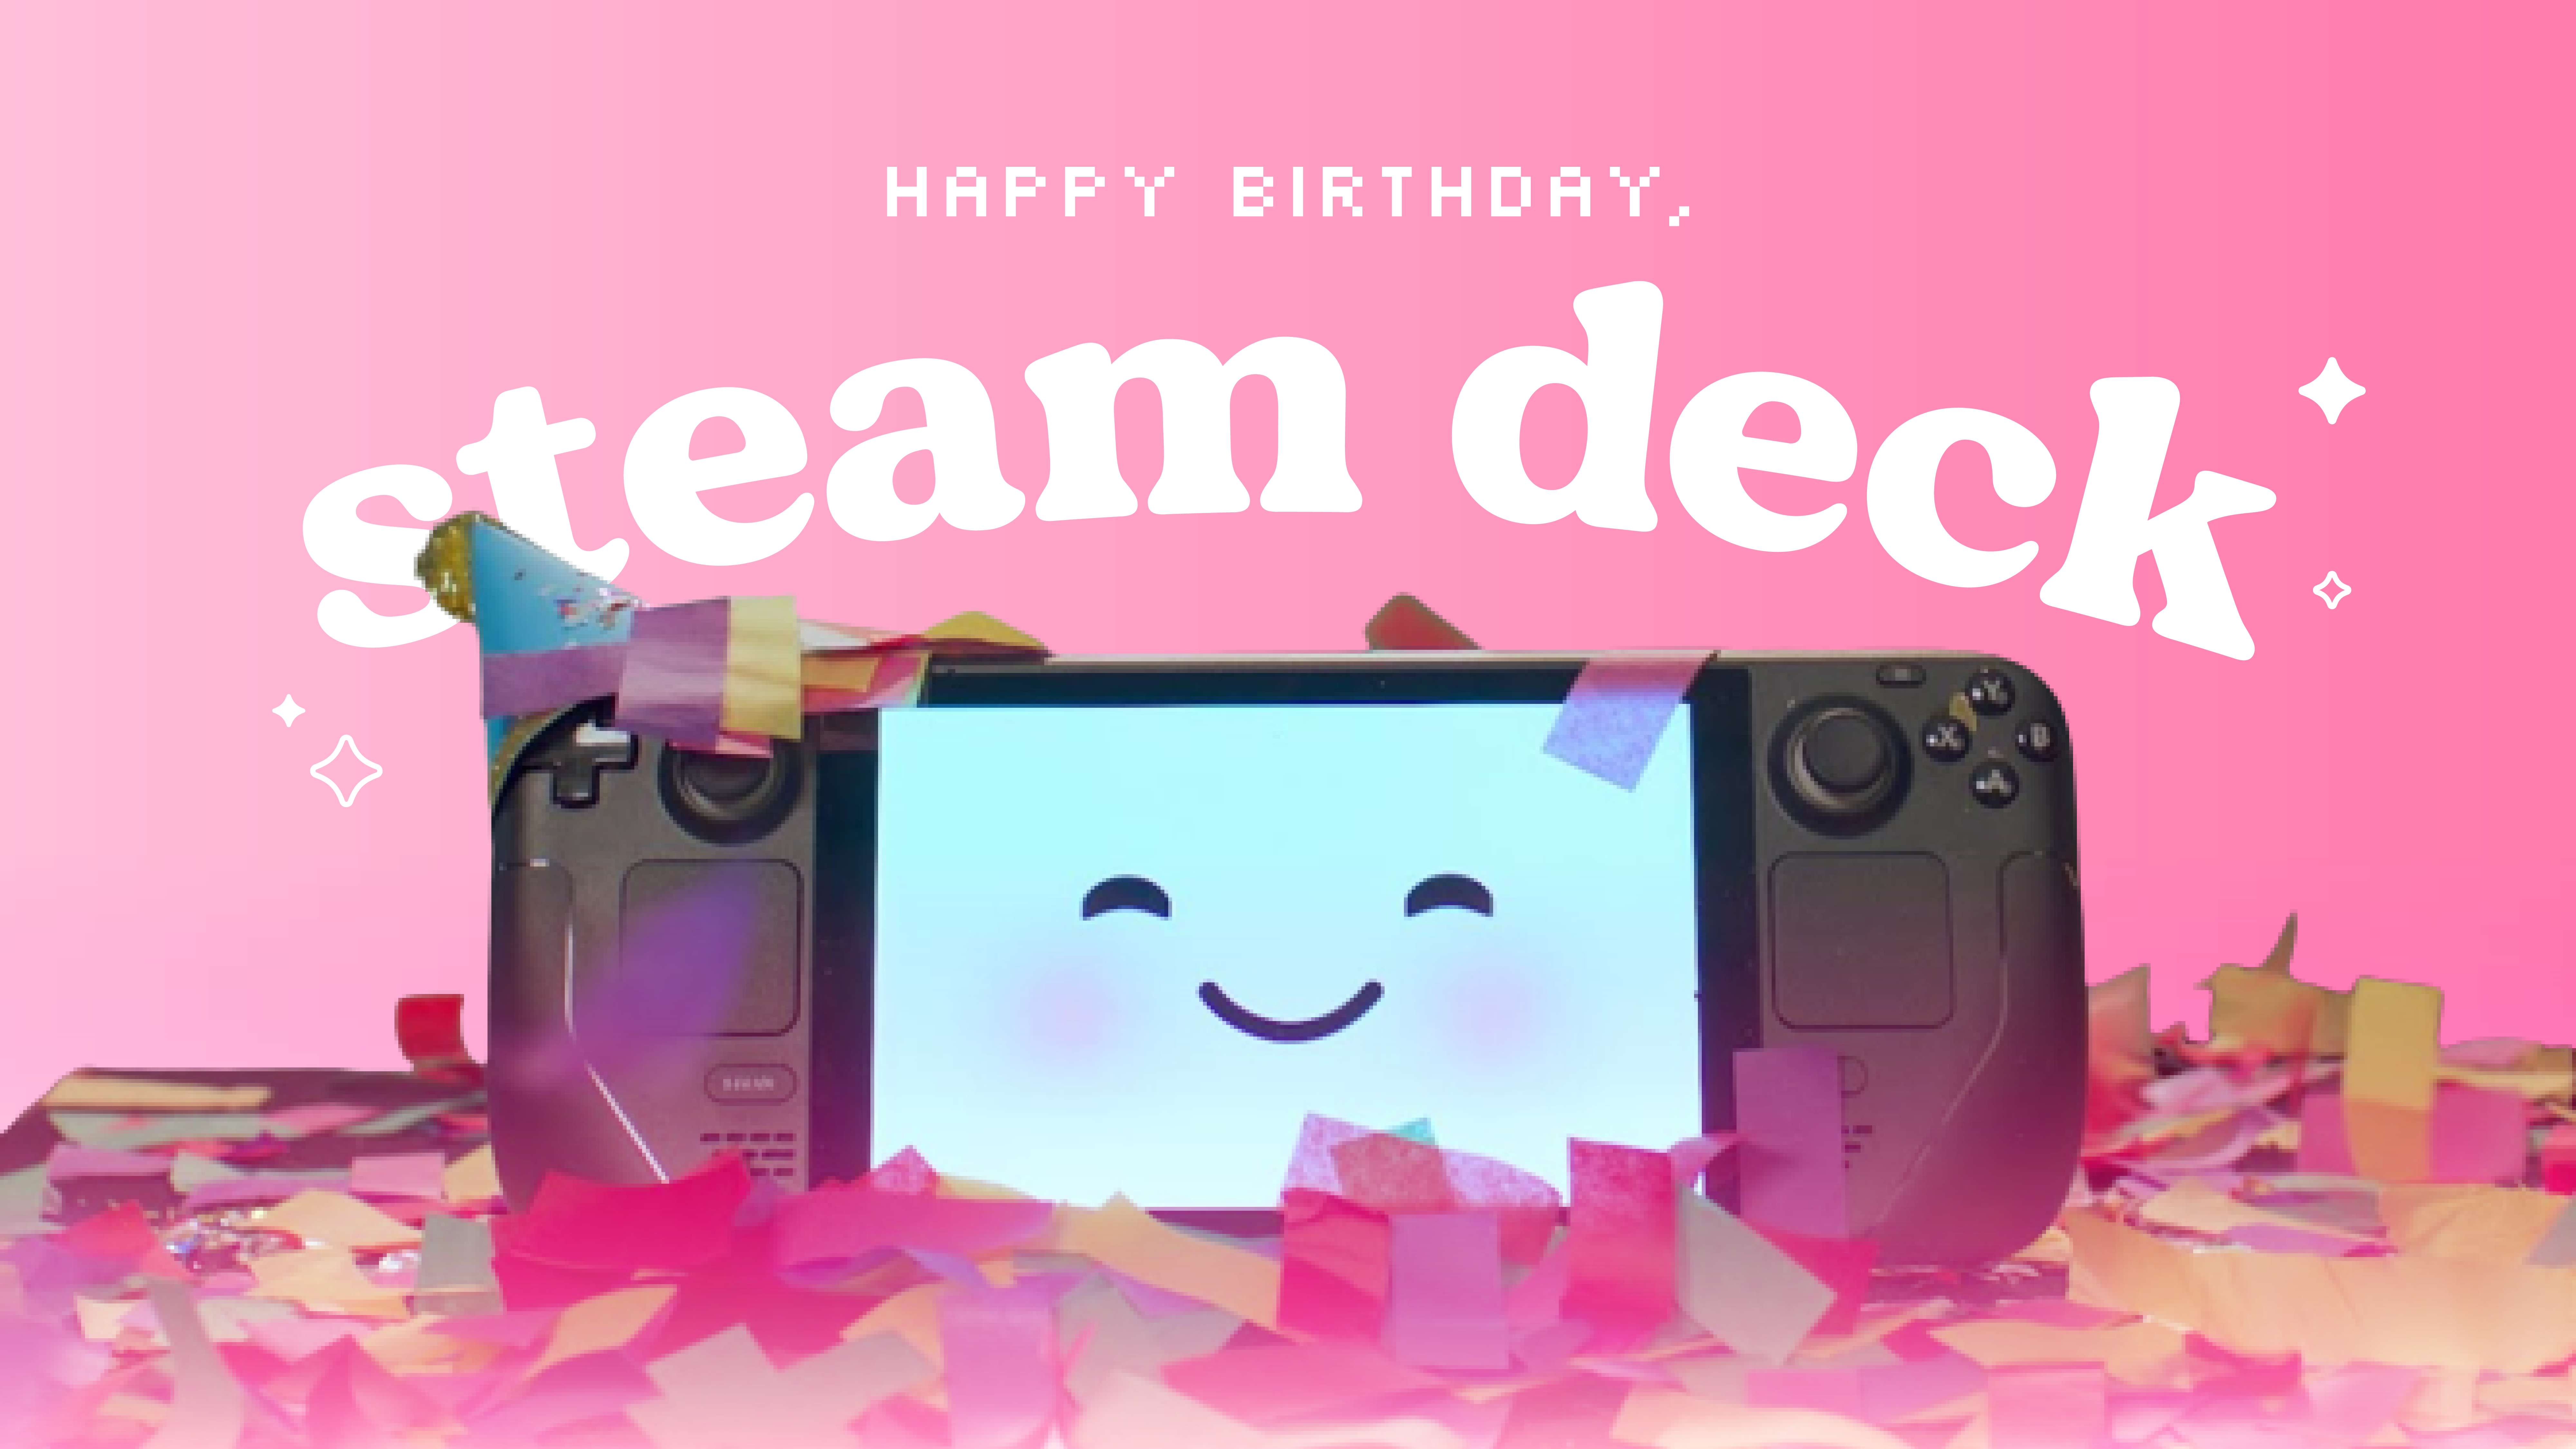 the steam deck is officially one year old, and it's sale time!